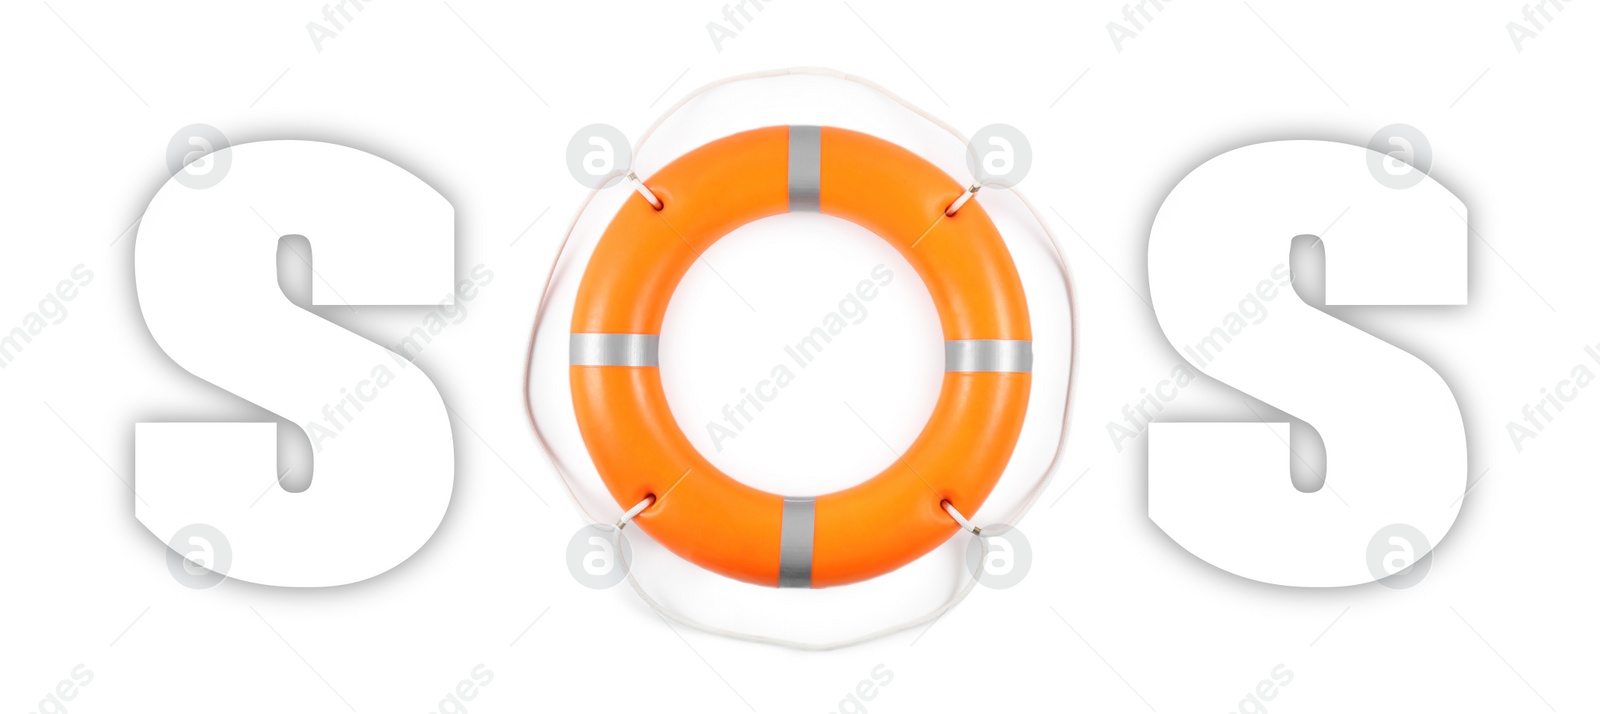 Image of SOS message made from lifebuoy and letters on white background. Banner design